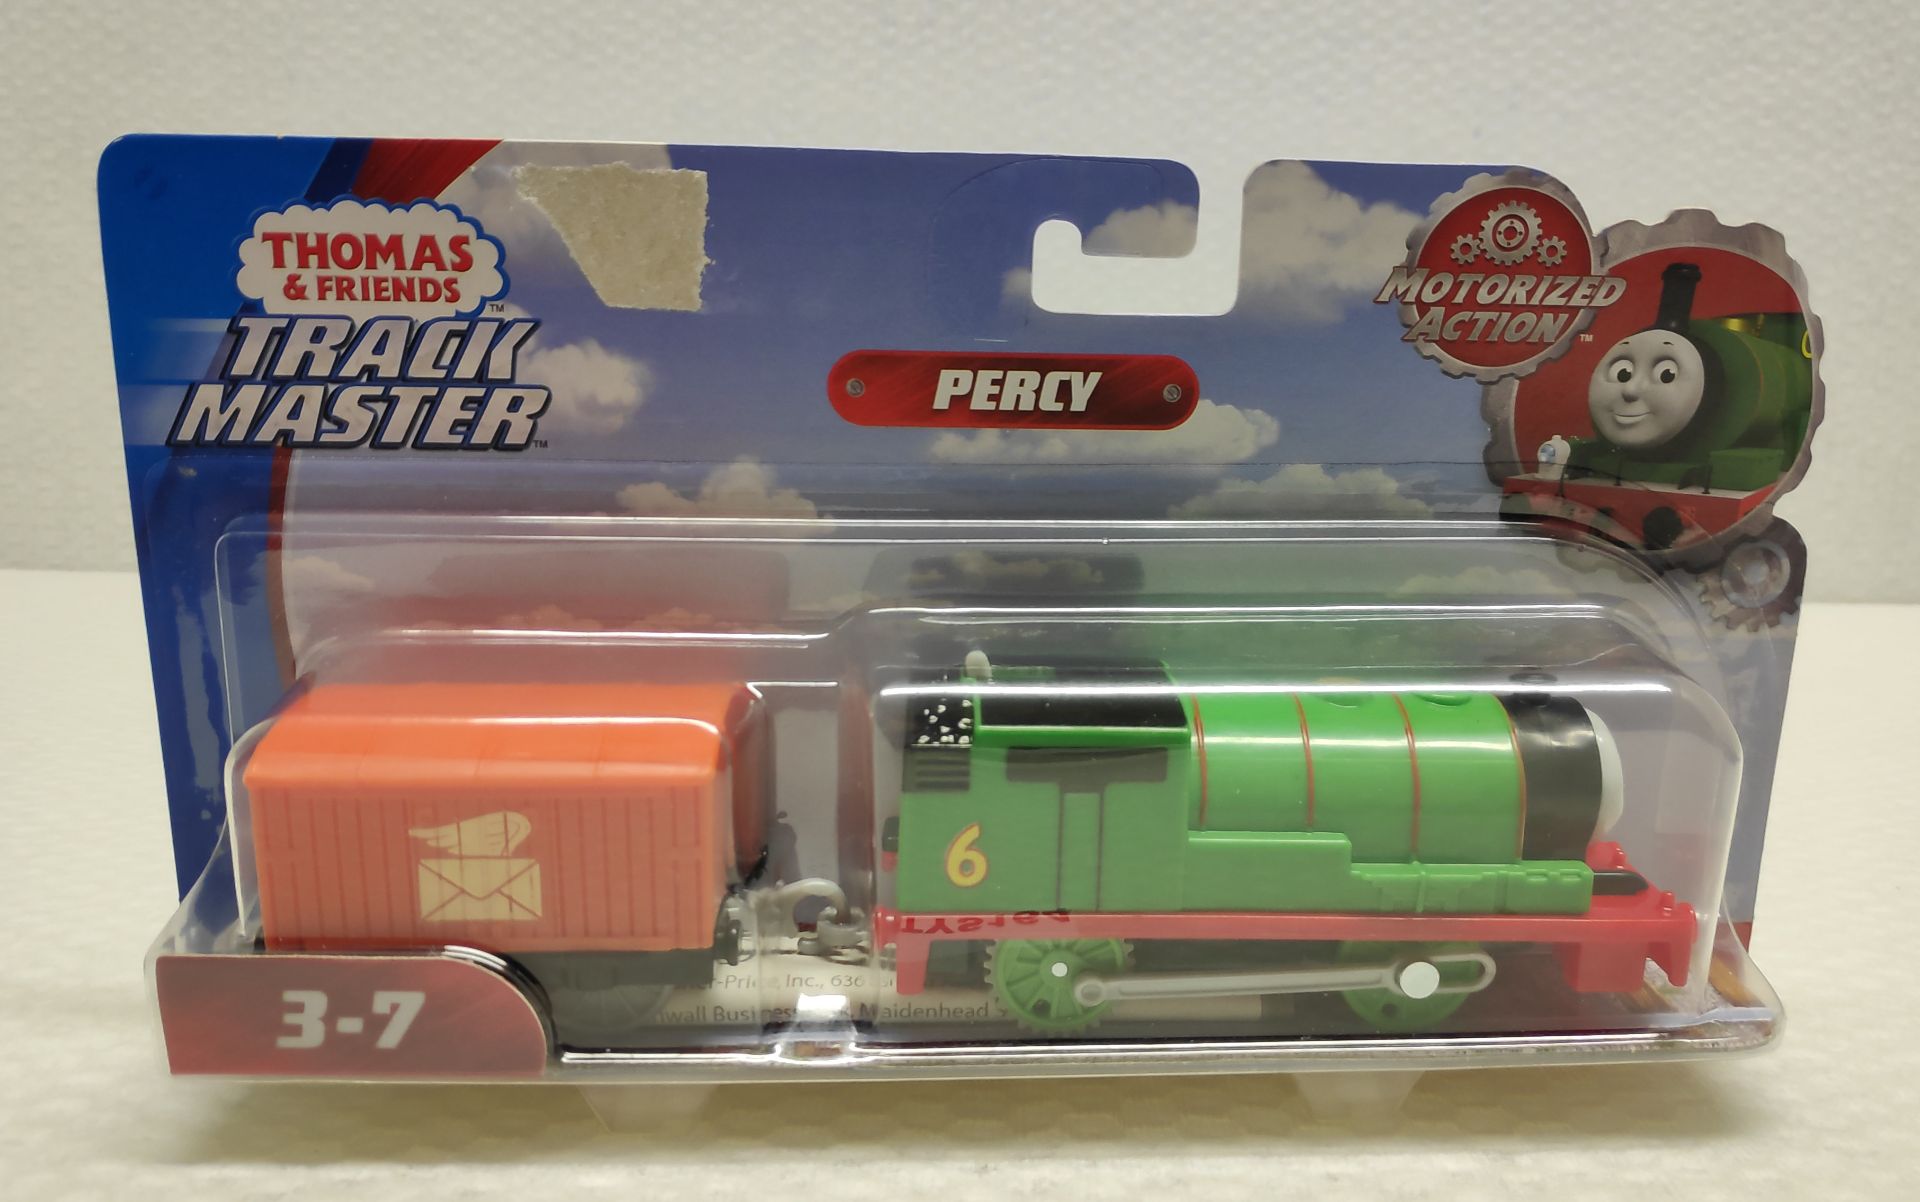 5 x Thomas & Friends Trackmaster Trains - Percy, Gordon, James, Emily and Rebecca - New/Boxed - HTYS - Image 3 of 8